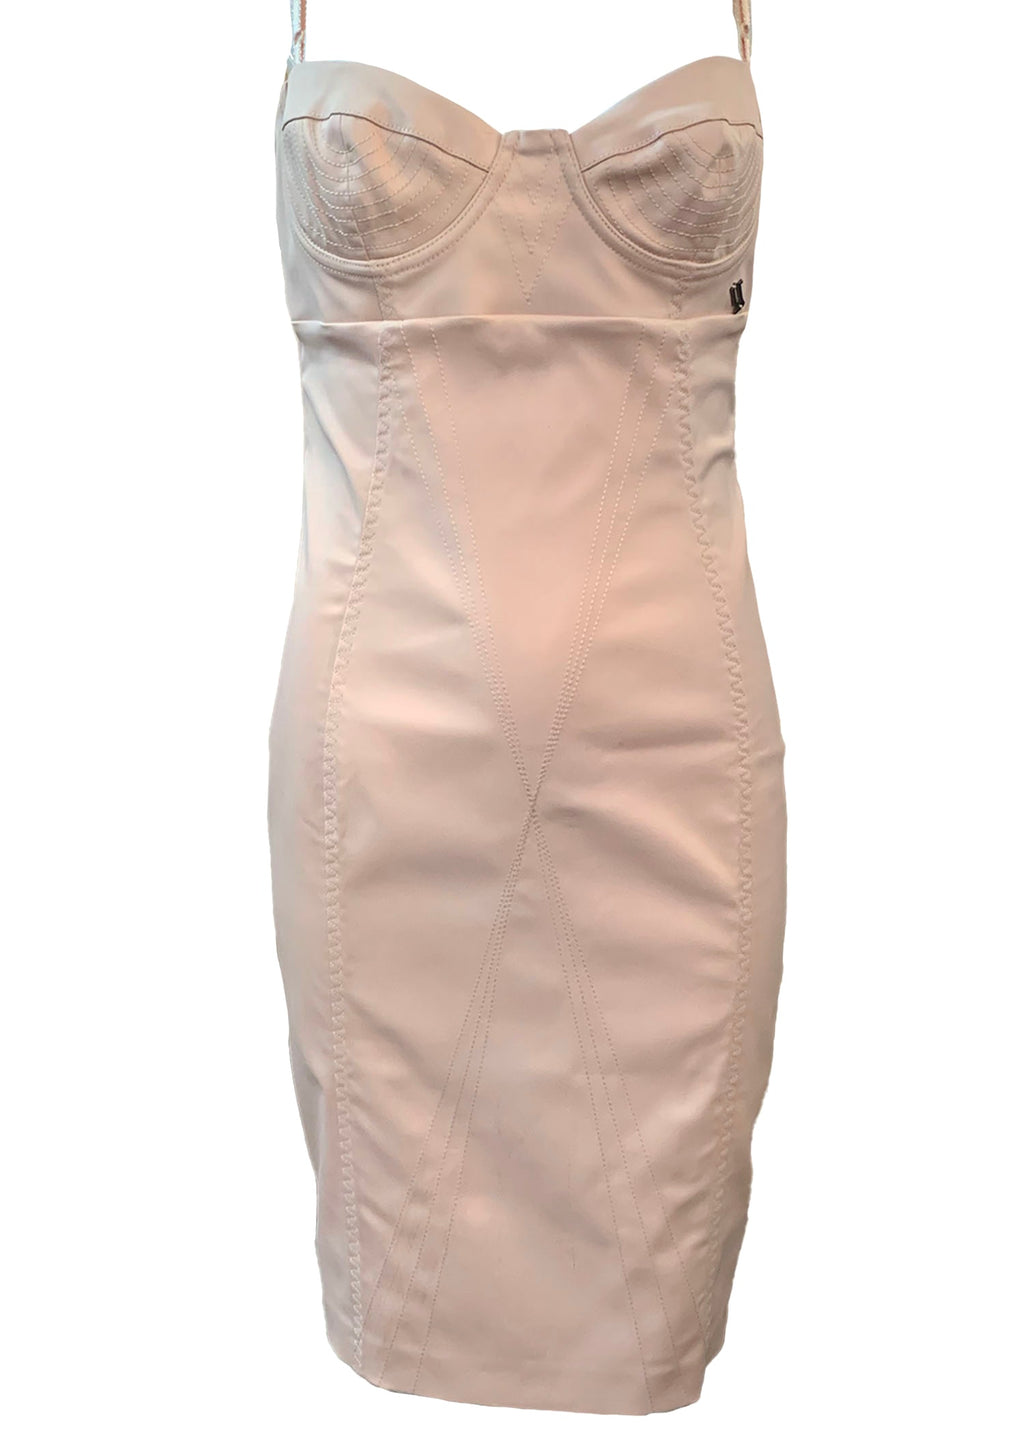    John  Galliano Early 2000s Pink Lingerie "Girdle"Dress FRONT 1 of 5